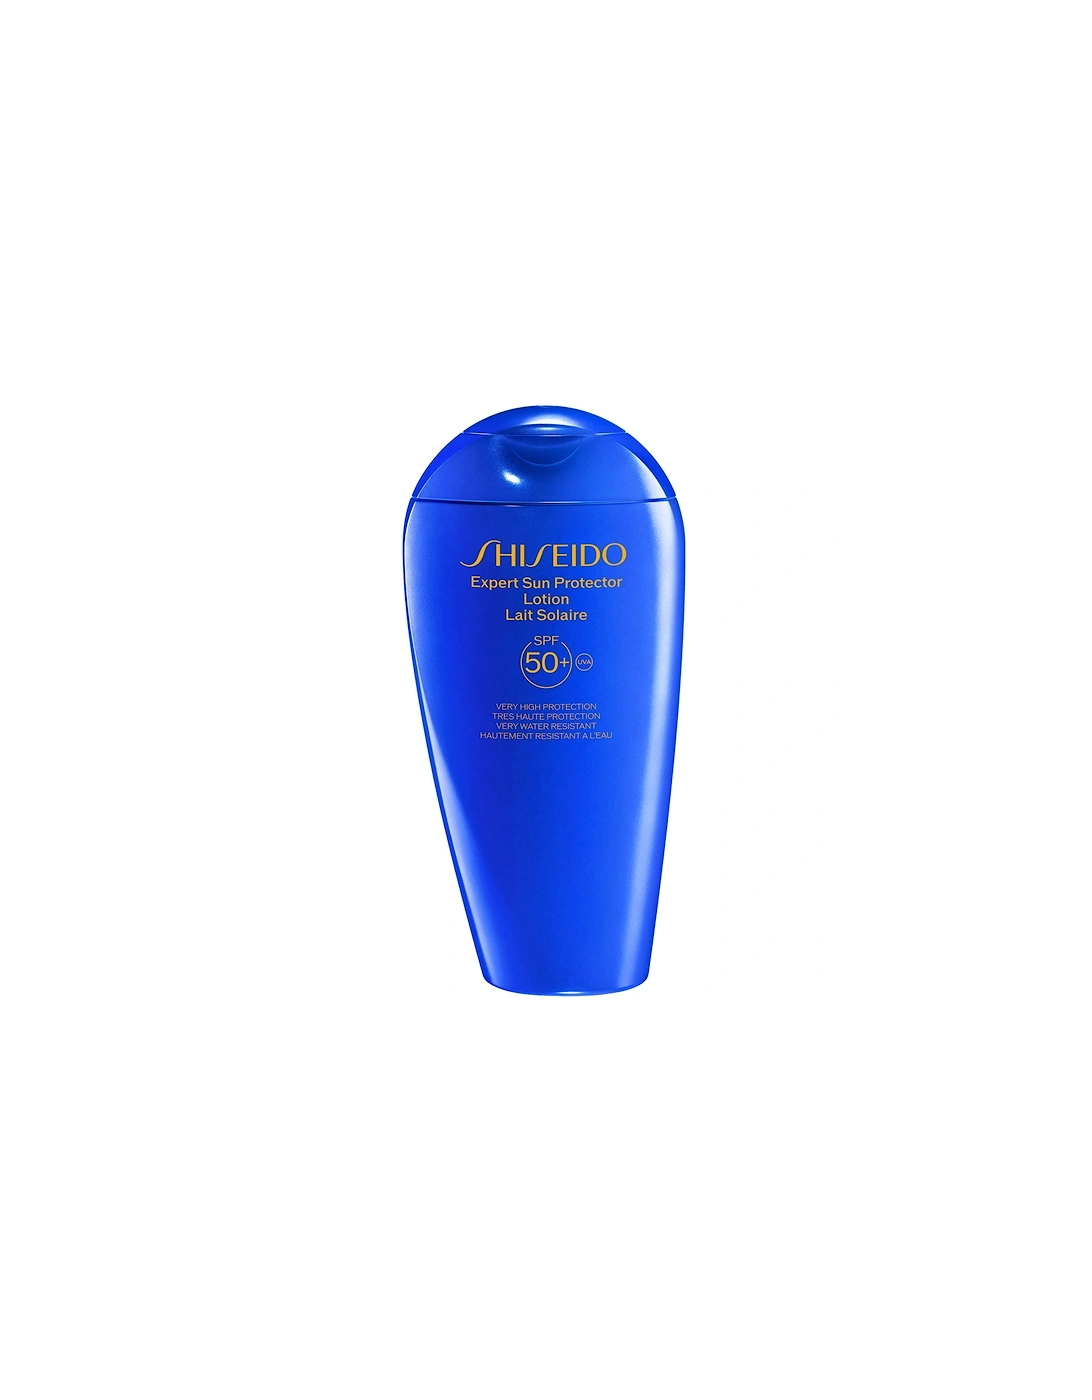 Expert Sun Protector Face and Body Lotion SPF50+ 300ml, 2 of 1